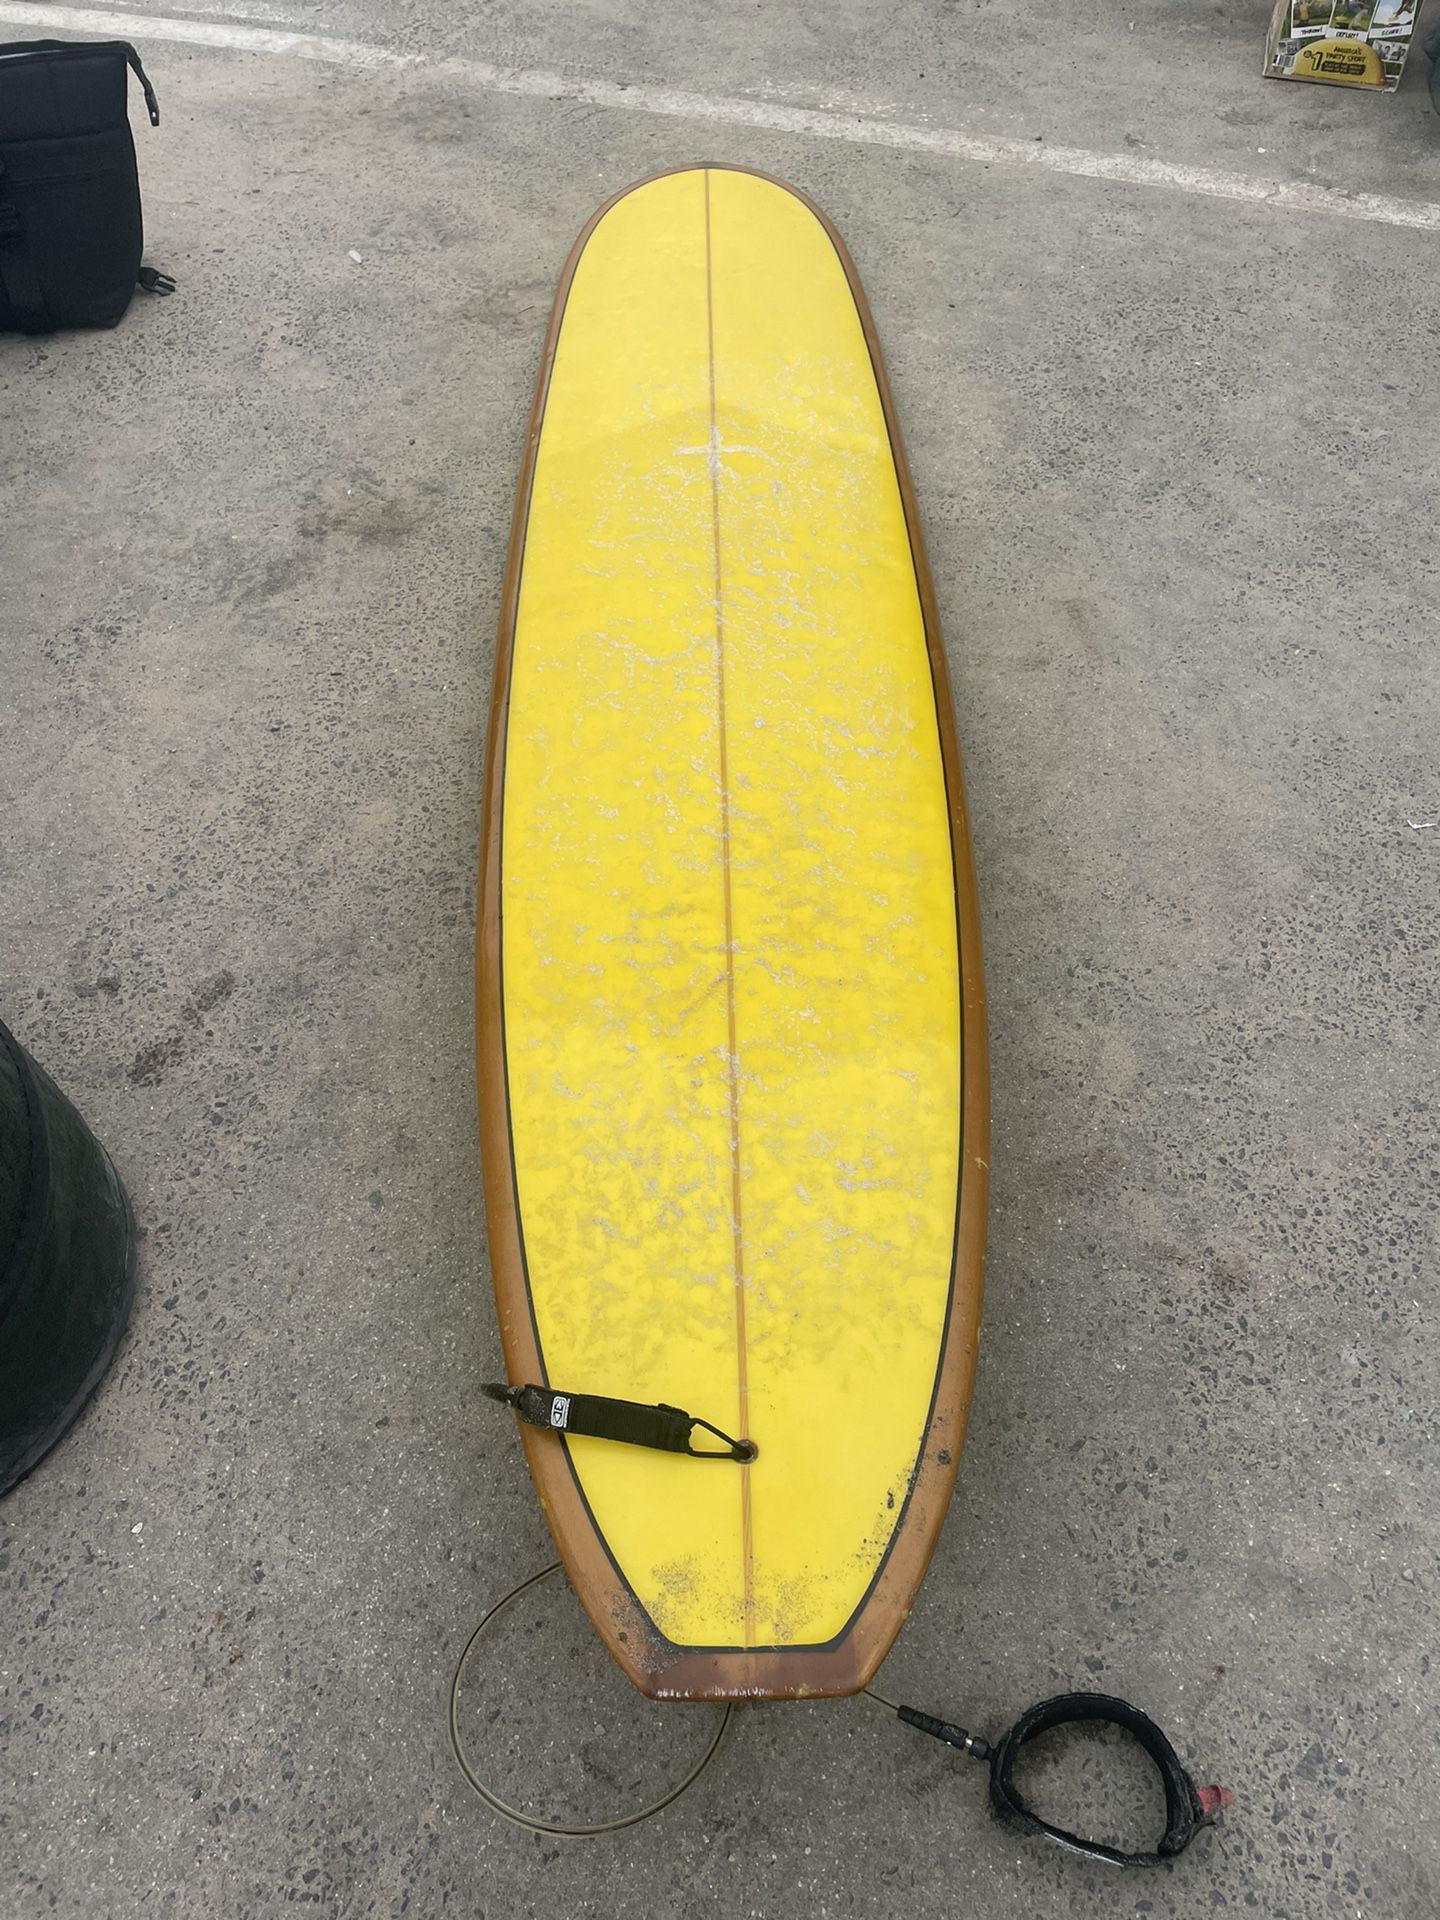 9 Foot Surfboard For Sale